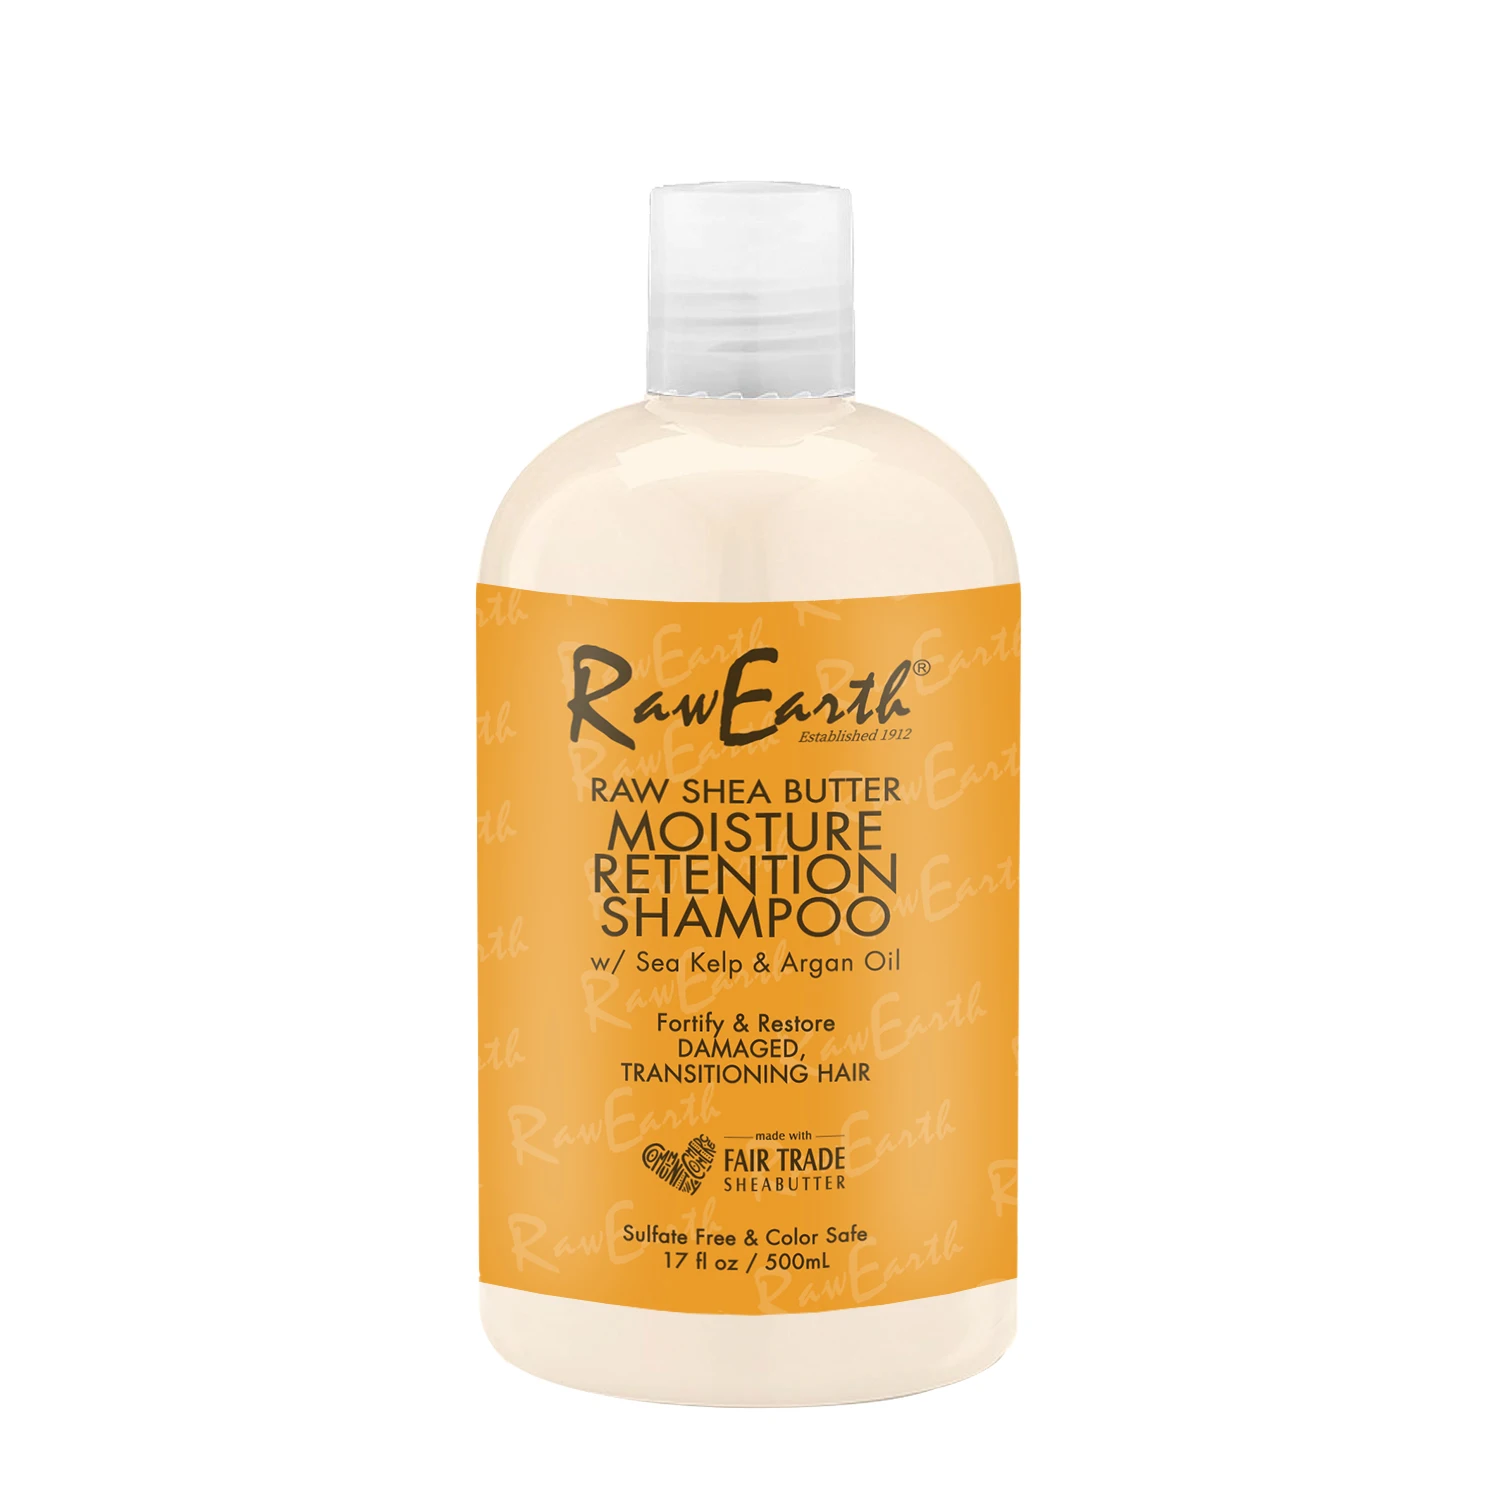 

Raw Earth Calming and Comforting Raw Shea Butter Moisture Retention Shampoo